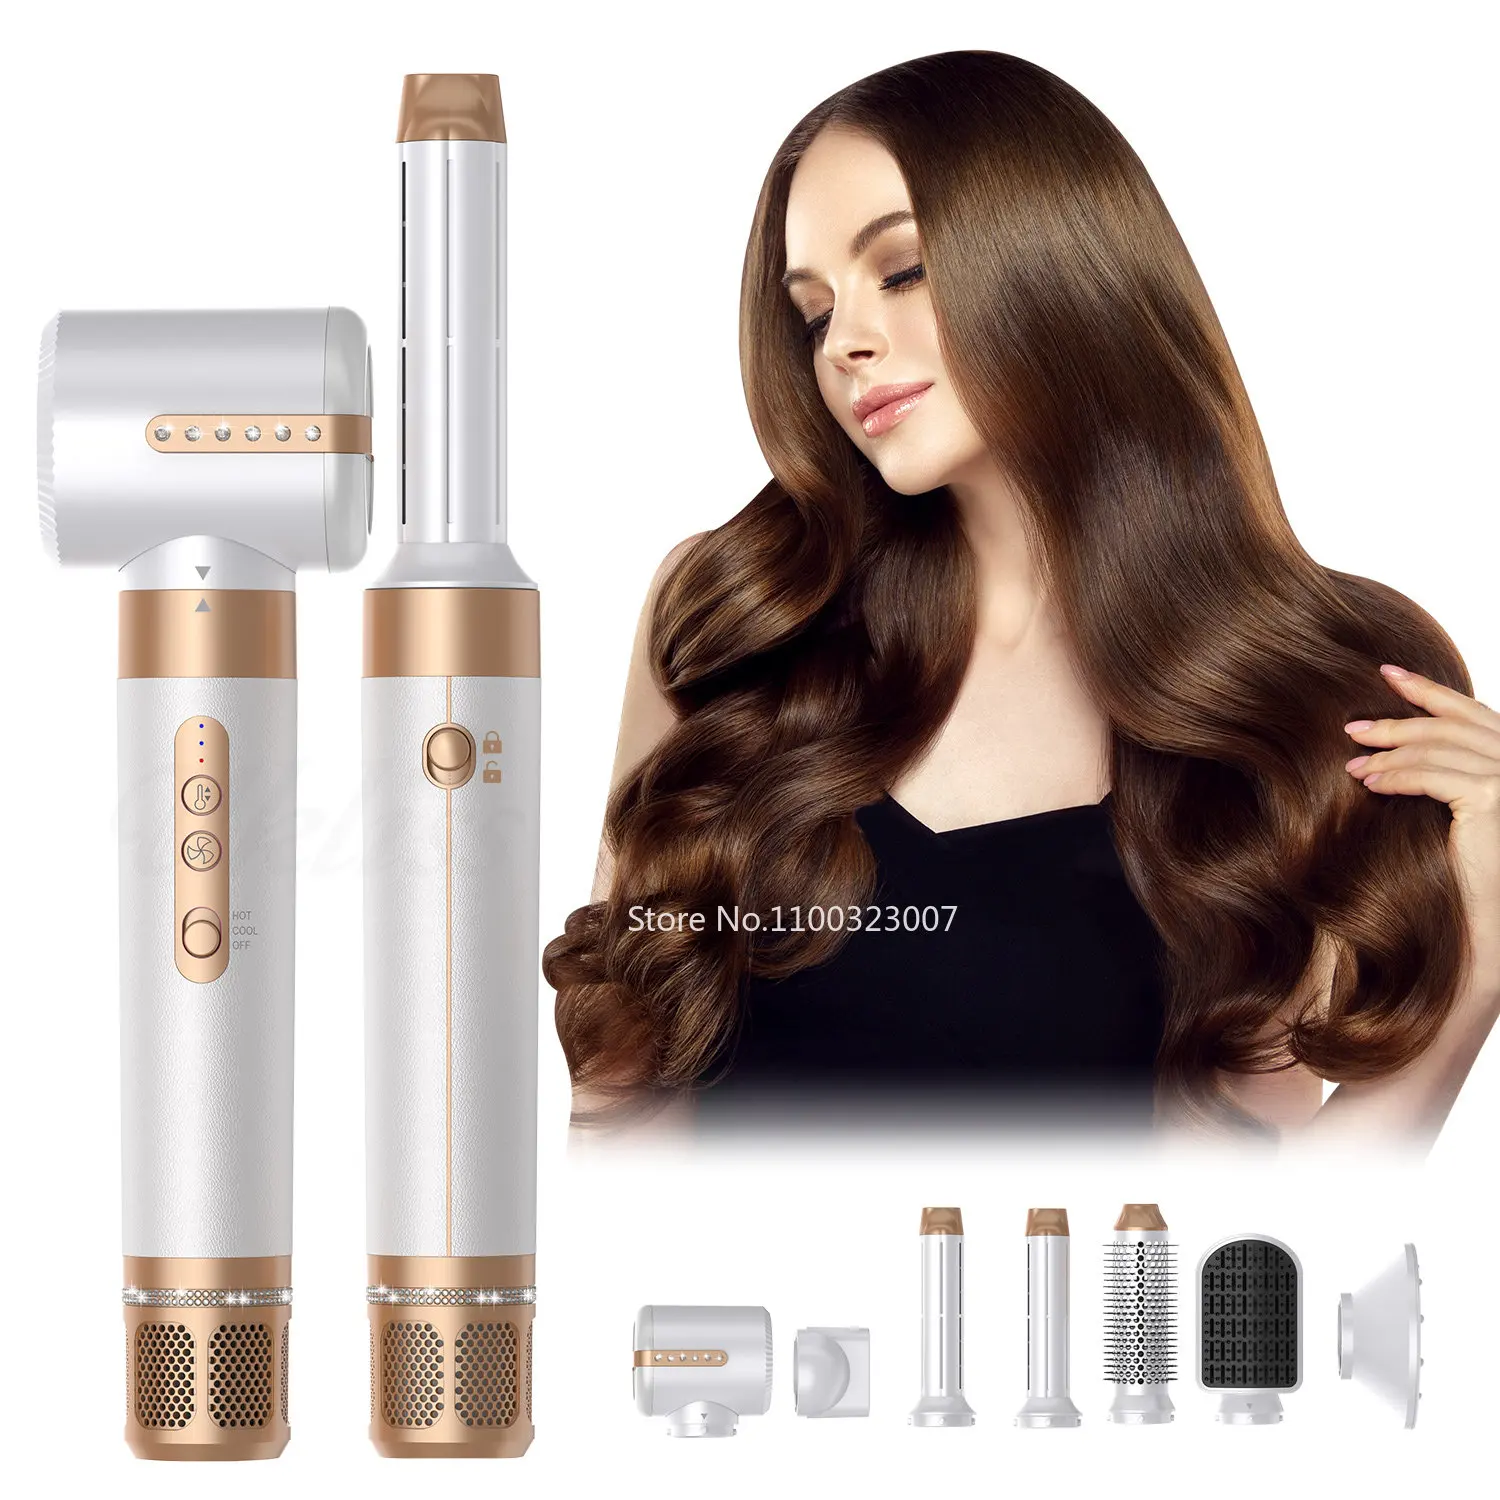 

7 In 1 Multi-function Hair Dryer Brushless Hot Air Brush Negative Ion High Speed Hair Dryers Styling Curling Iron Hair Curler